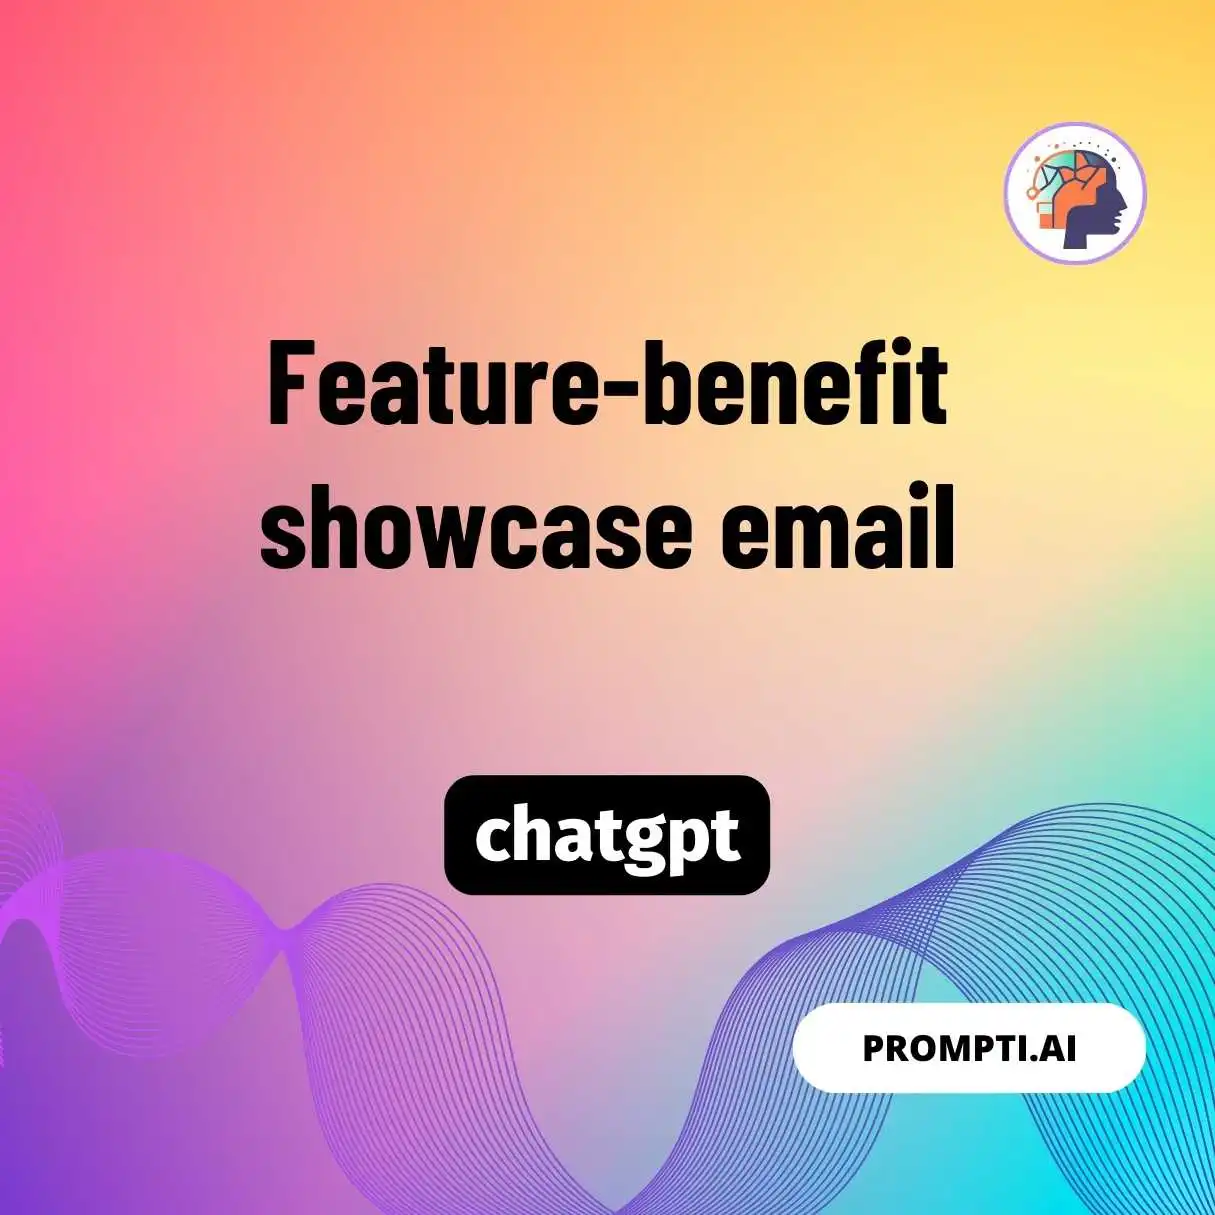 Feature-benefit showcase email